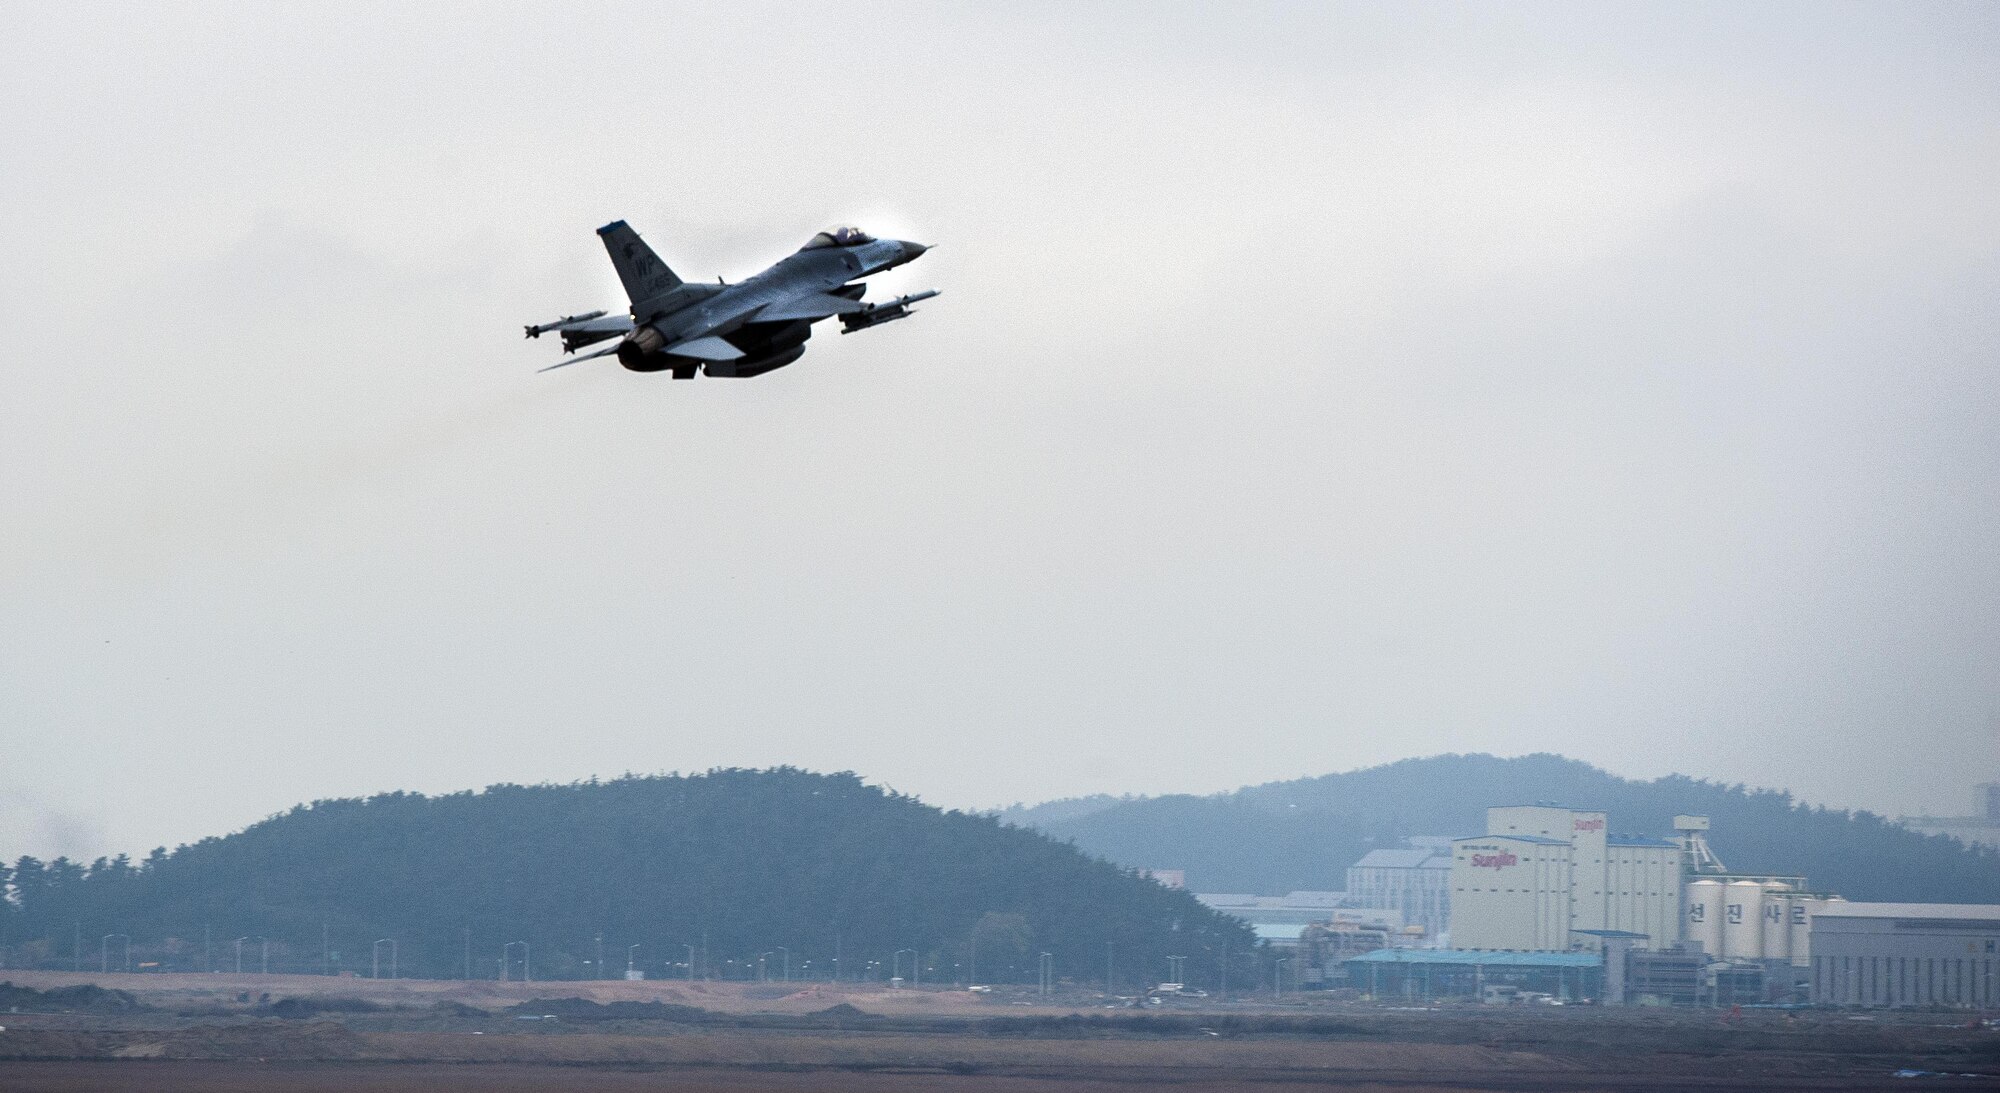 An F-16 Fighting Falcon from the 8th Fighter Wing takes off as part of Buddy Wing 15-7 at Kunsan Air Base, Republic of Korea, Nov. 17, 2015. Buddy Wing is part of a combined fighter exchange program designed to improve interoperability between U.S. Air Force and ROKAF fighter squadrons and are conducted multiple times throughout the year in order to promote cultural awareness and sharpen combined combat capabilities. (U.S. Air Force photo by Staff Sgt. Nick Wilson/Released)